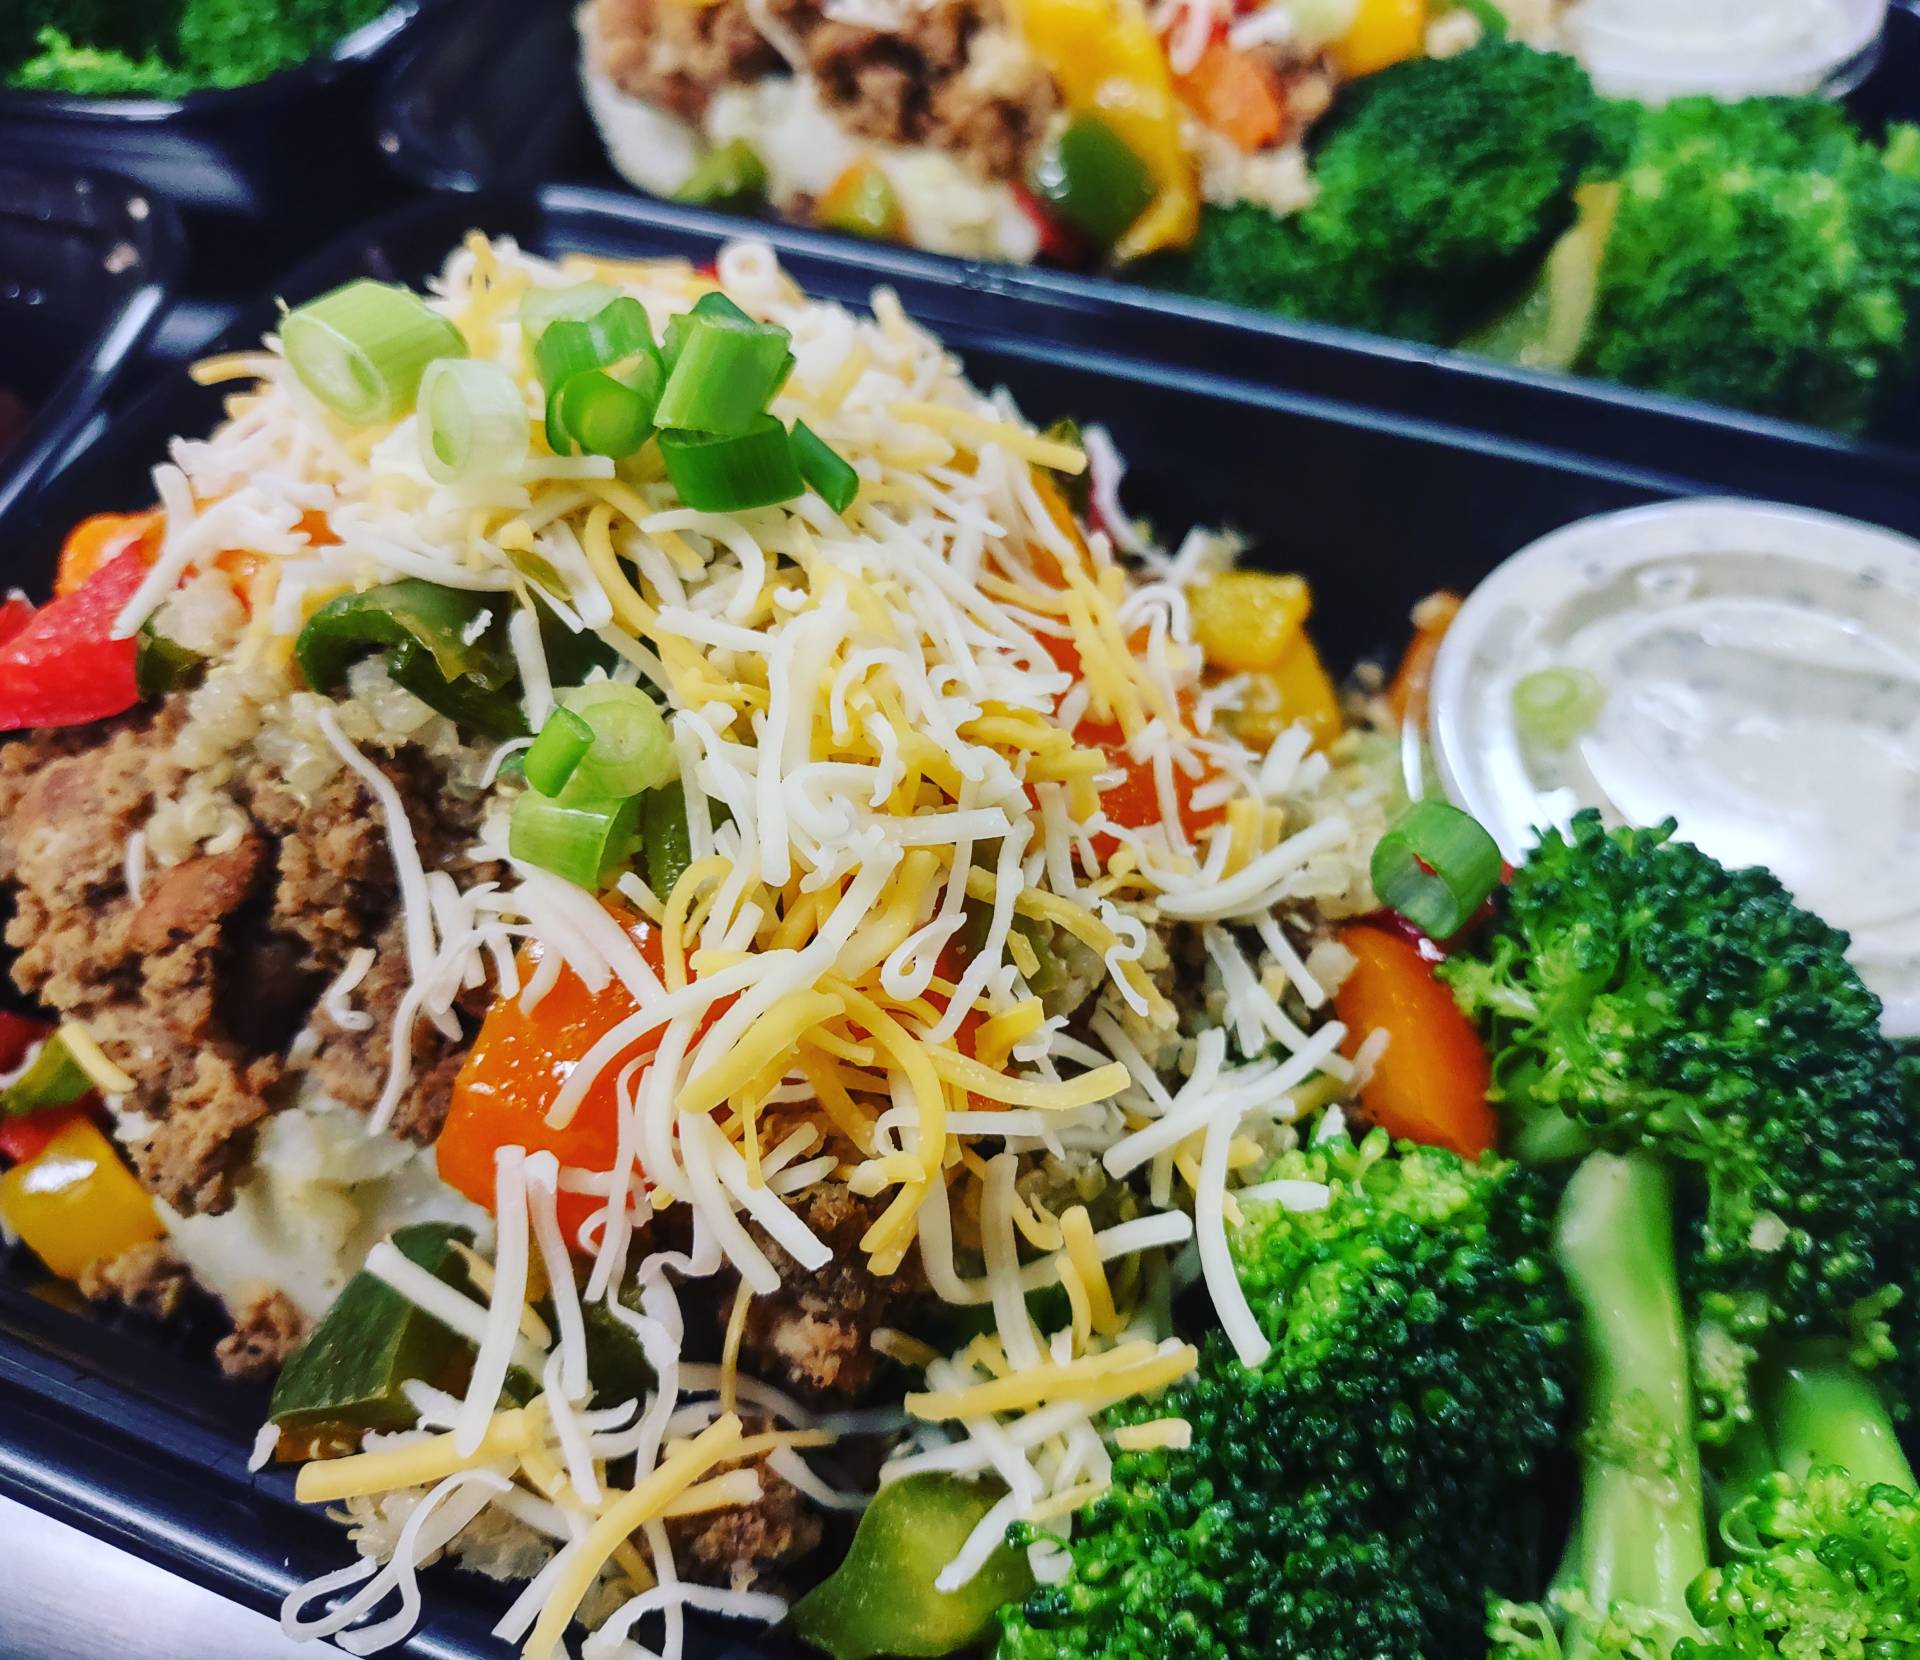 Baked Potato w/Seasoned Grass-fed Beef, Roasted Peppers, Blended Cheddar & Green Onions...Broccolini.